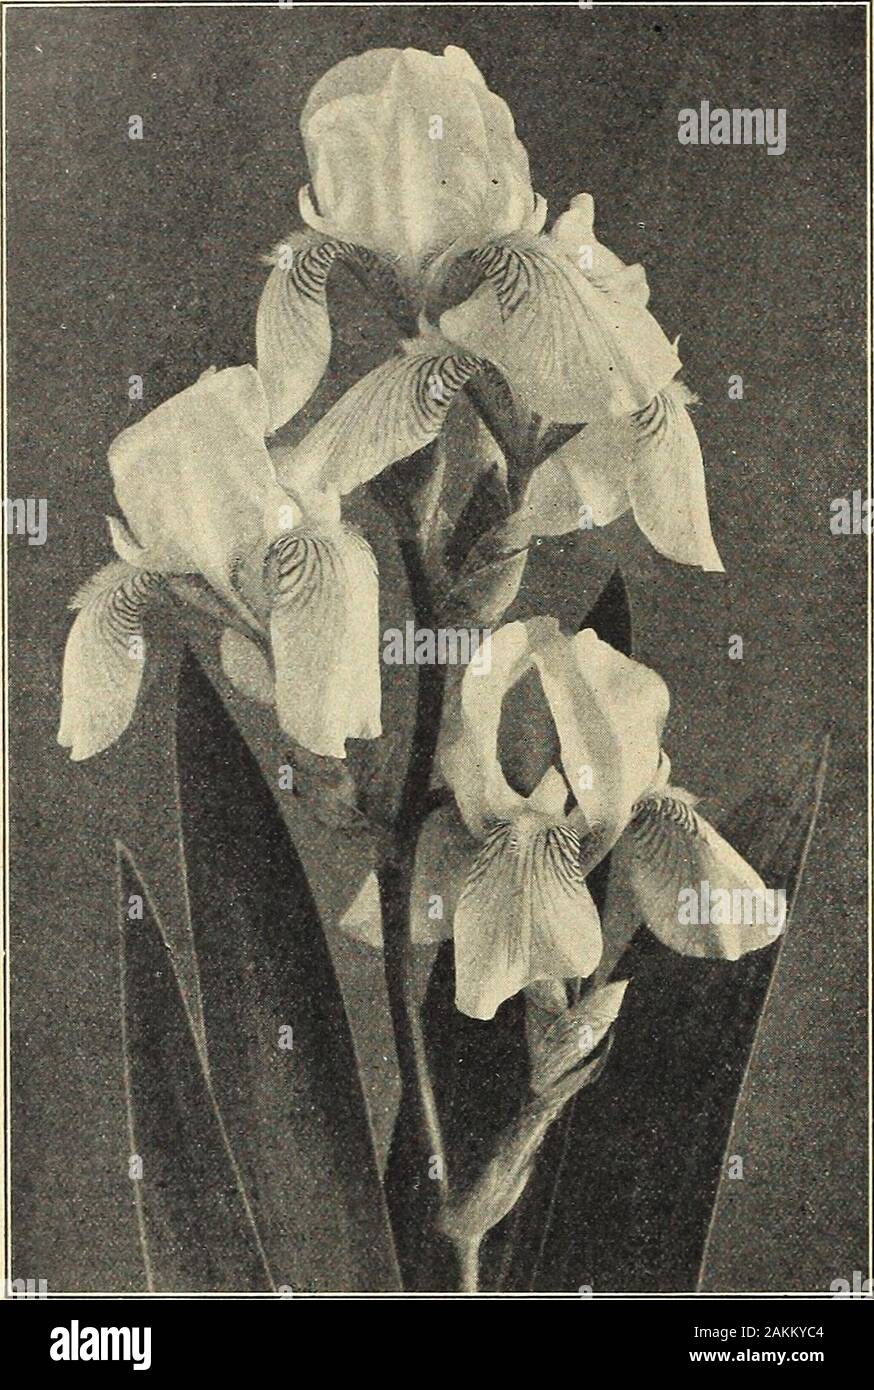 Farquhar's garden annual : 1918 . ight, 2 ft.Edith. S. porcelain-blue; F. veined dark velvety-blue on a white ground; very free flowering; height, 2 ft.Elizabeth. S. pale blue, passing to grey; F. soft lilac-blue; fine for cutting; height, 21 ft.Flavescens. (Canary Bird.) S. and F. soft-yellow; sweetly scented; fine for cutting; height, 2^ ft.Florentina Purpurea. S. violet; F. purple; very early flowering; height, 2 ft.Florentina Alba. (Queen Emma.) S. and F. soft shade of grey, almost white, very free and early flowering; fine for cutting; height, 2 ft.Fontarabie. S. violet-blue; F. violet-pu Stock Photo